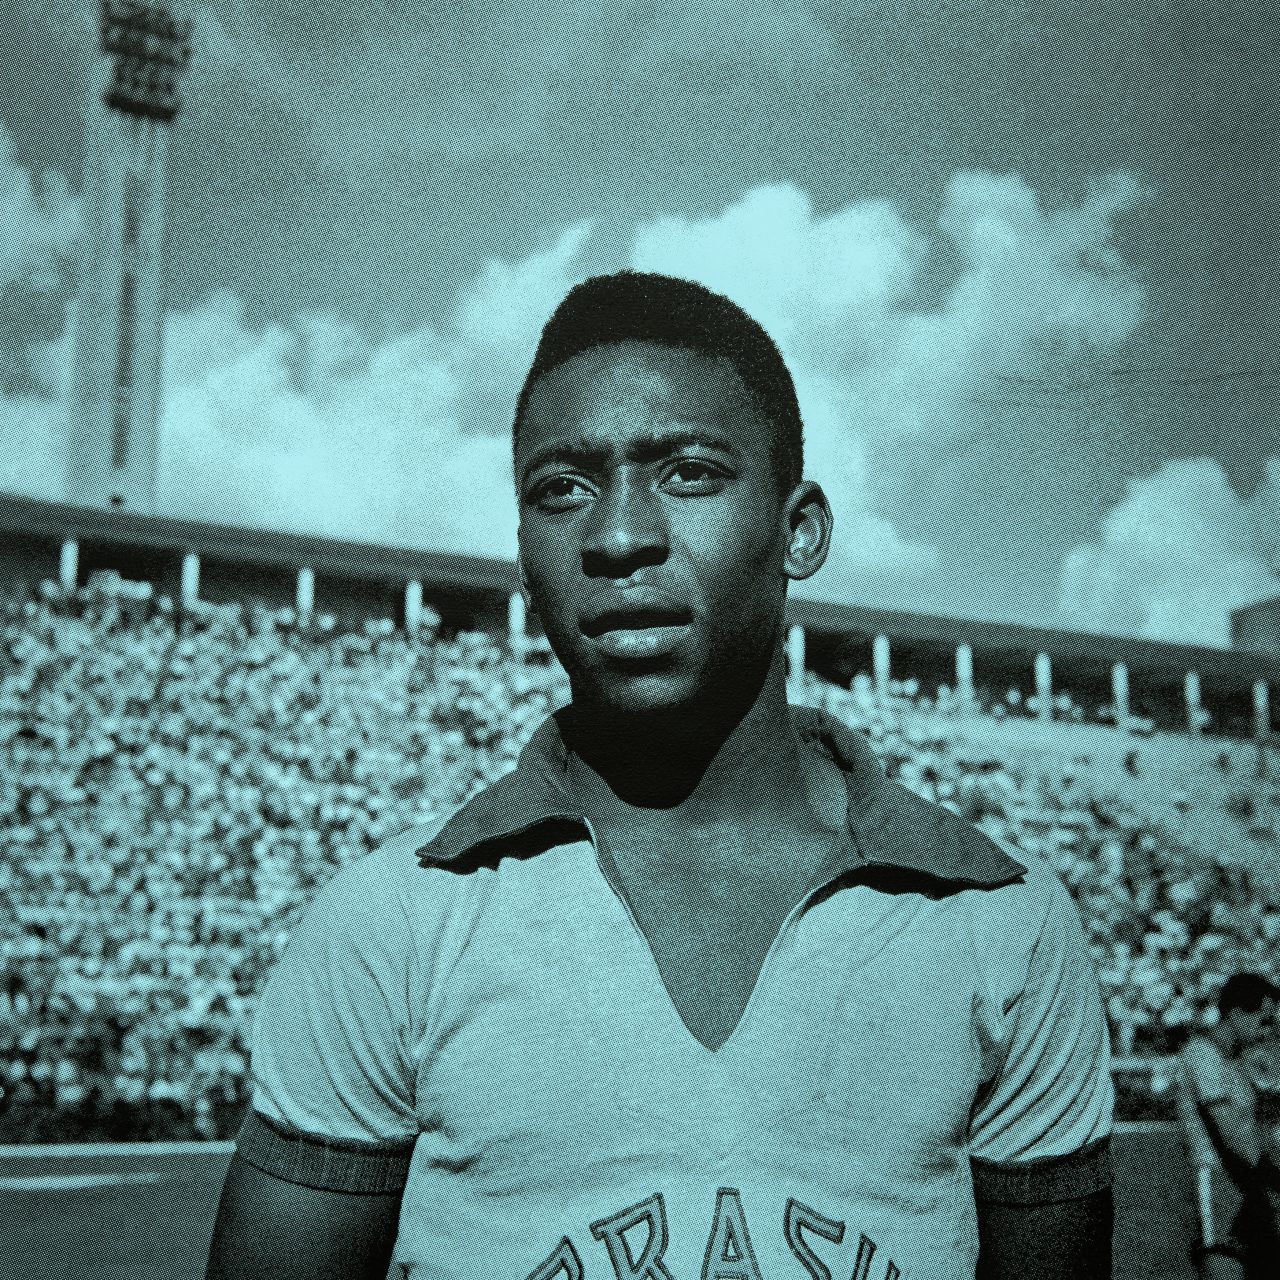 Pele was a loyal servant to the club he signed with age 16 -- Santos. He spent 18 years there as a player, winning over 20 trophies and scoring more than 600 goals. "I had many offers to play for Real Madrid, in Milan and Manchester United," Pele said. "However Santos was doing well, I was playing well. I didn't want to leave. Nowadays, players leave very early."